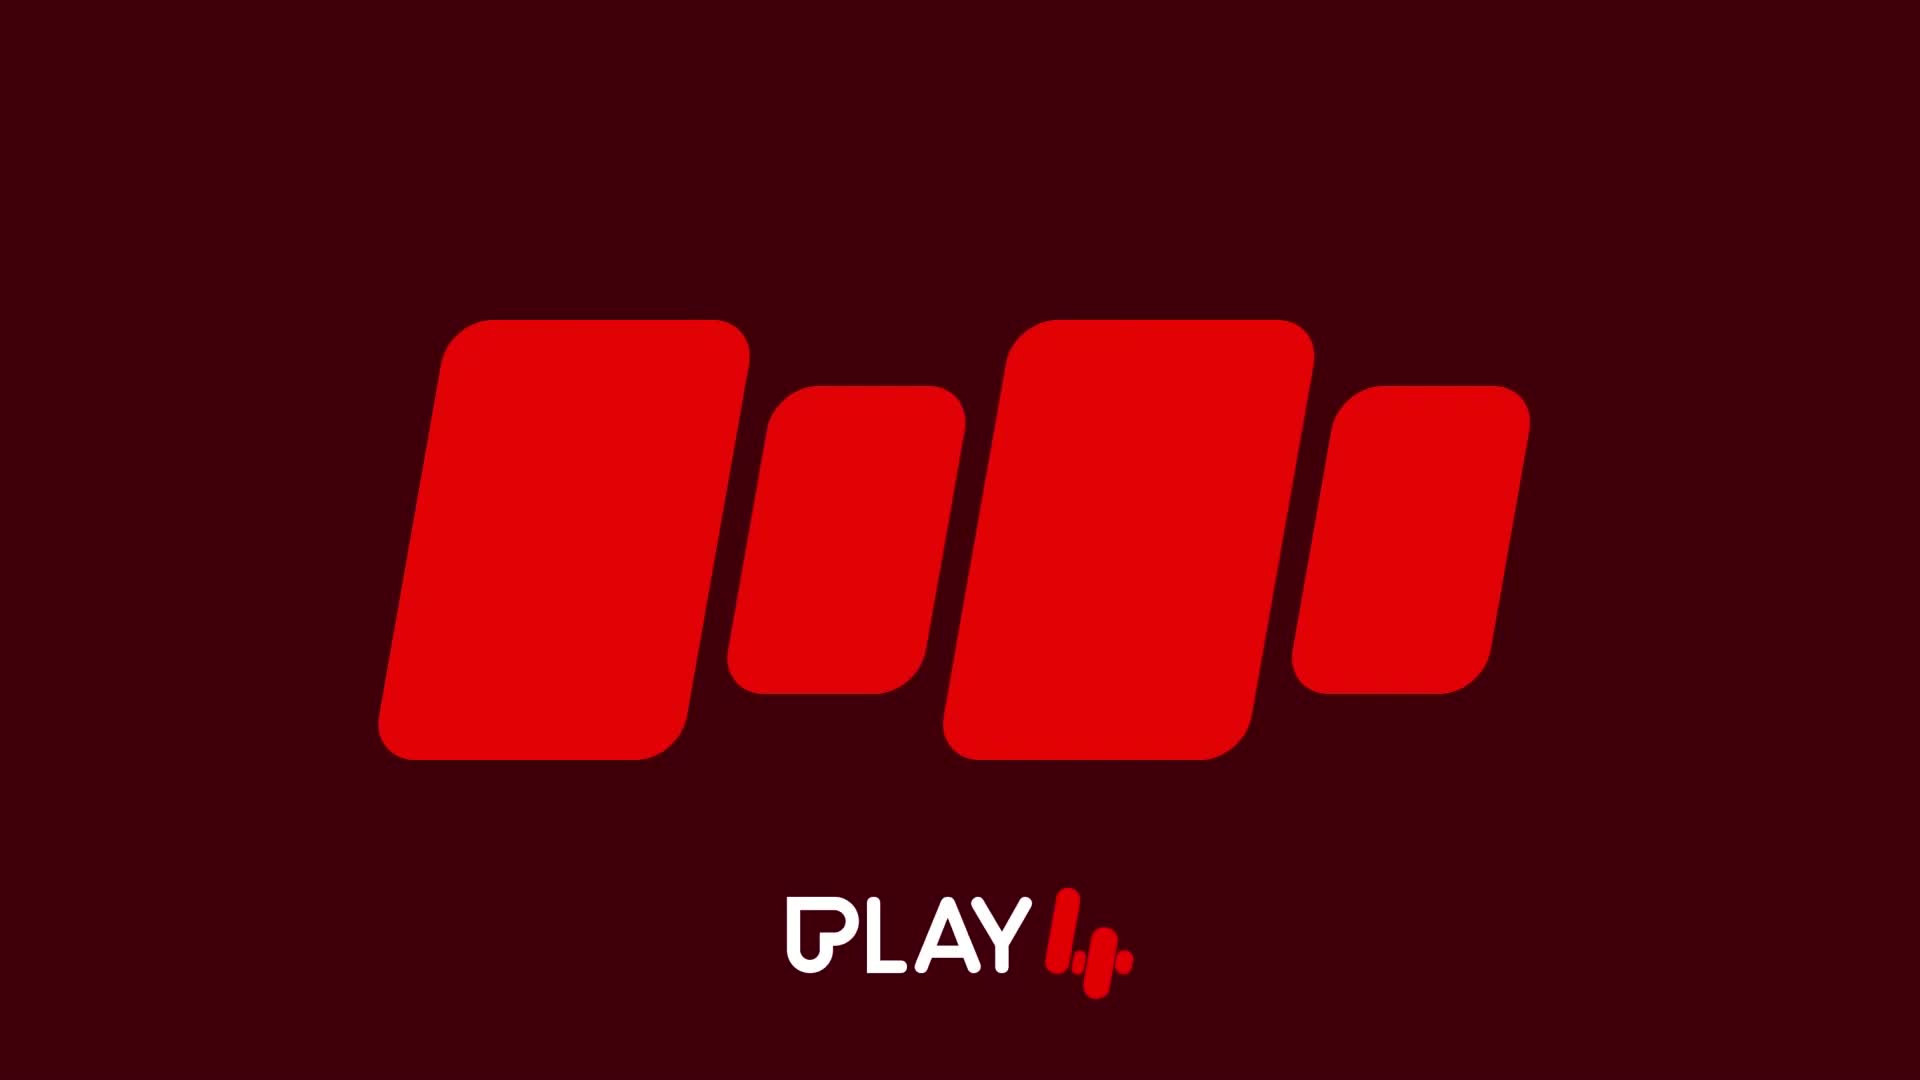 BE PLAY 4 HD - BELGIUM  LUXEMBOURG